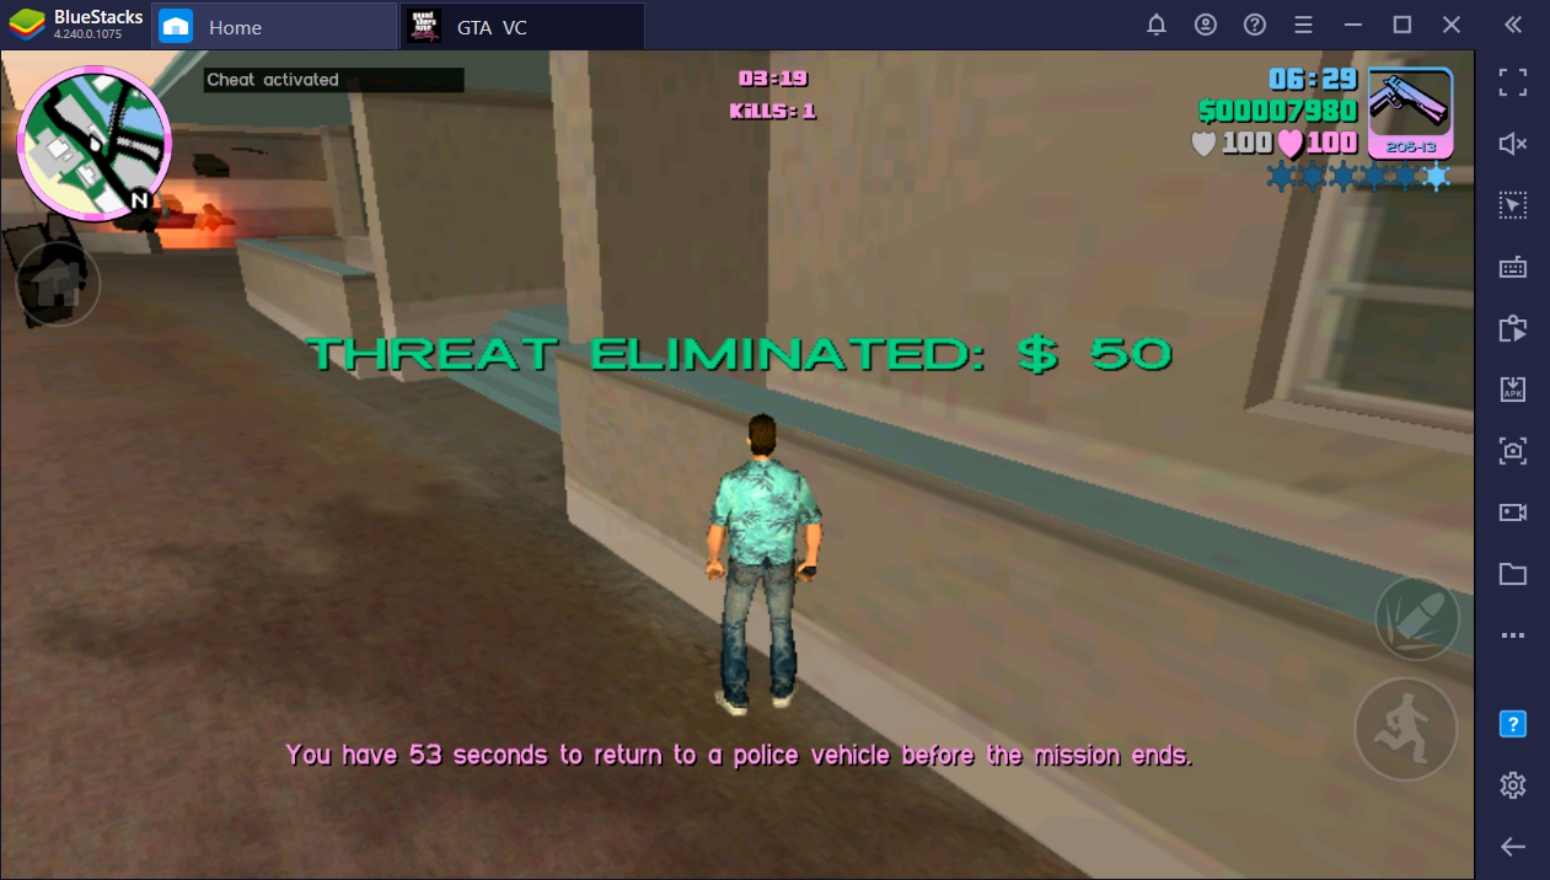 How to get easy money in gta vice city